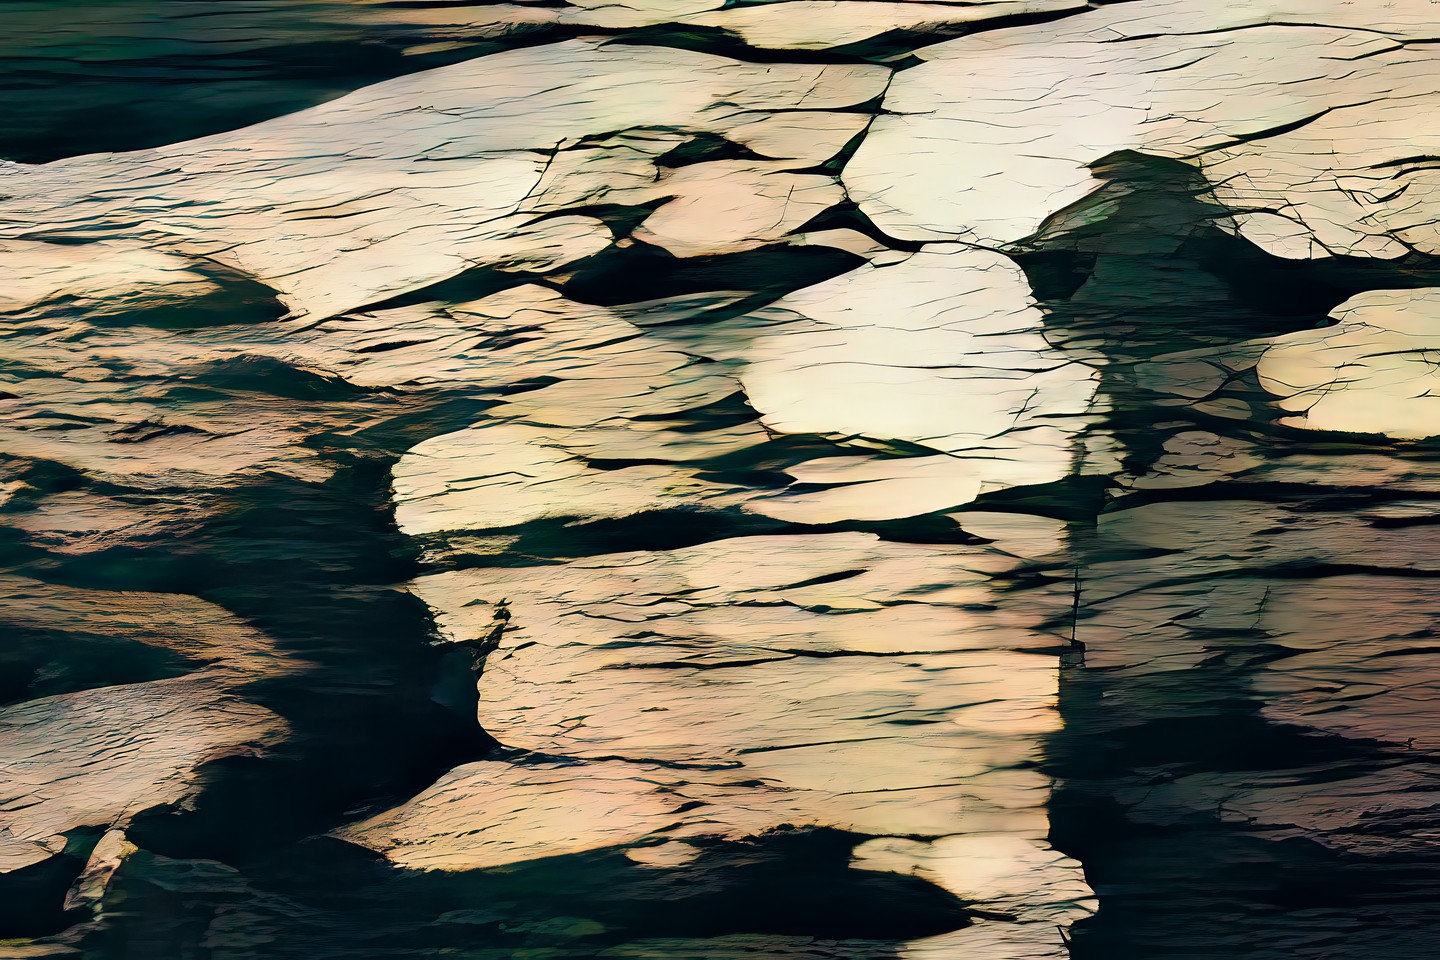 - Strand -
An abstracted view of a stony strand by the sea. From my Found Art 2023 series.

https://www.saatchiart.com/s